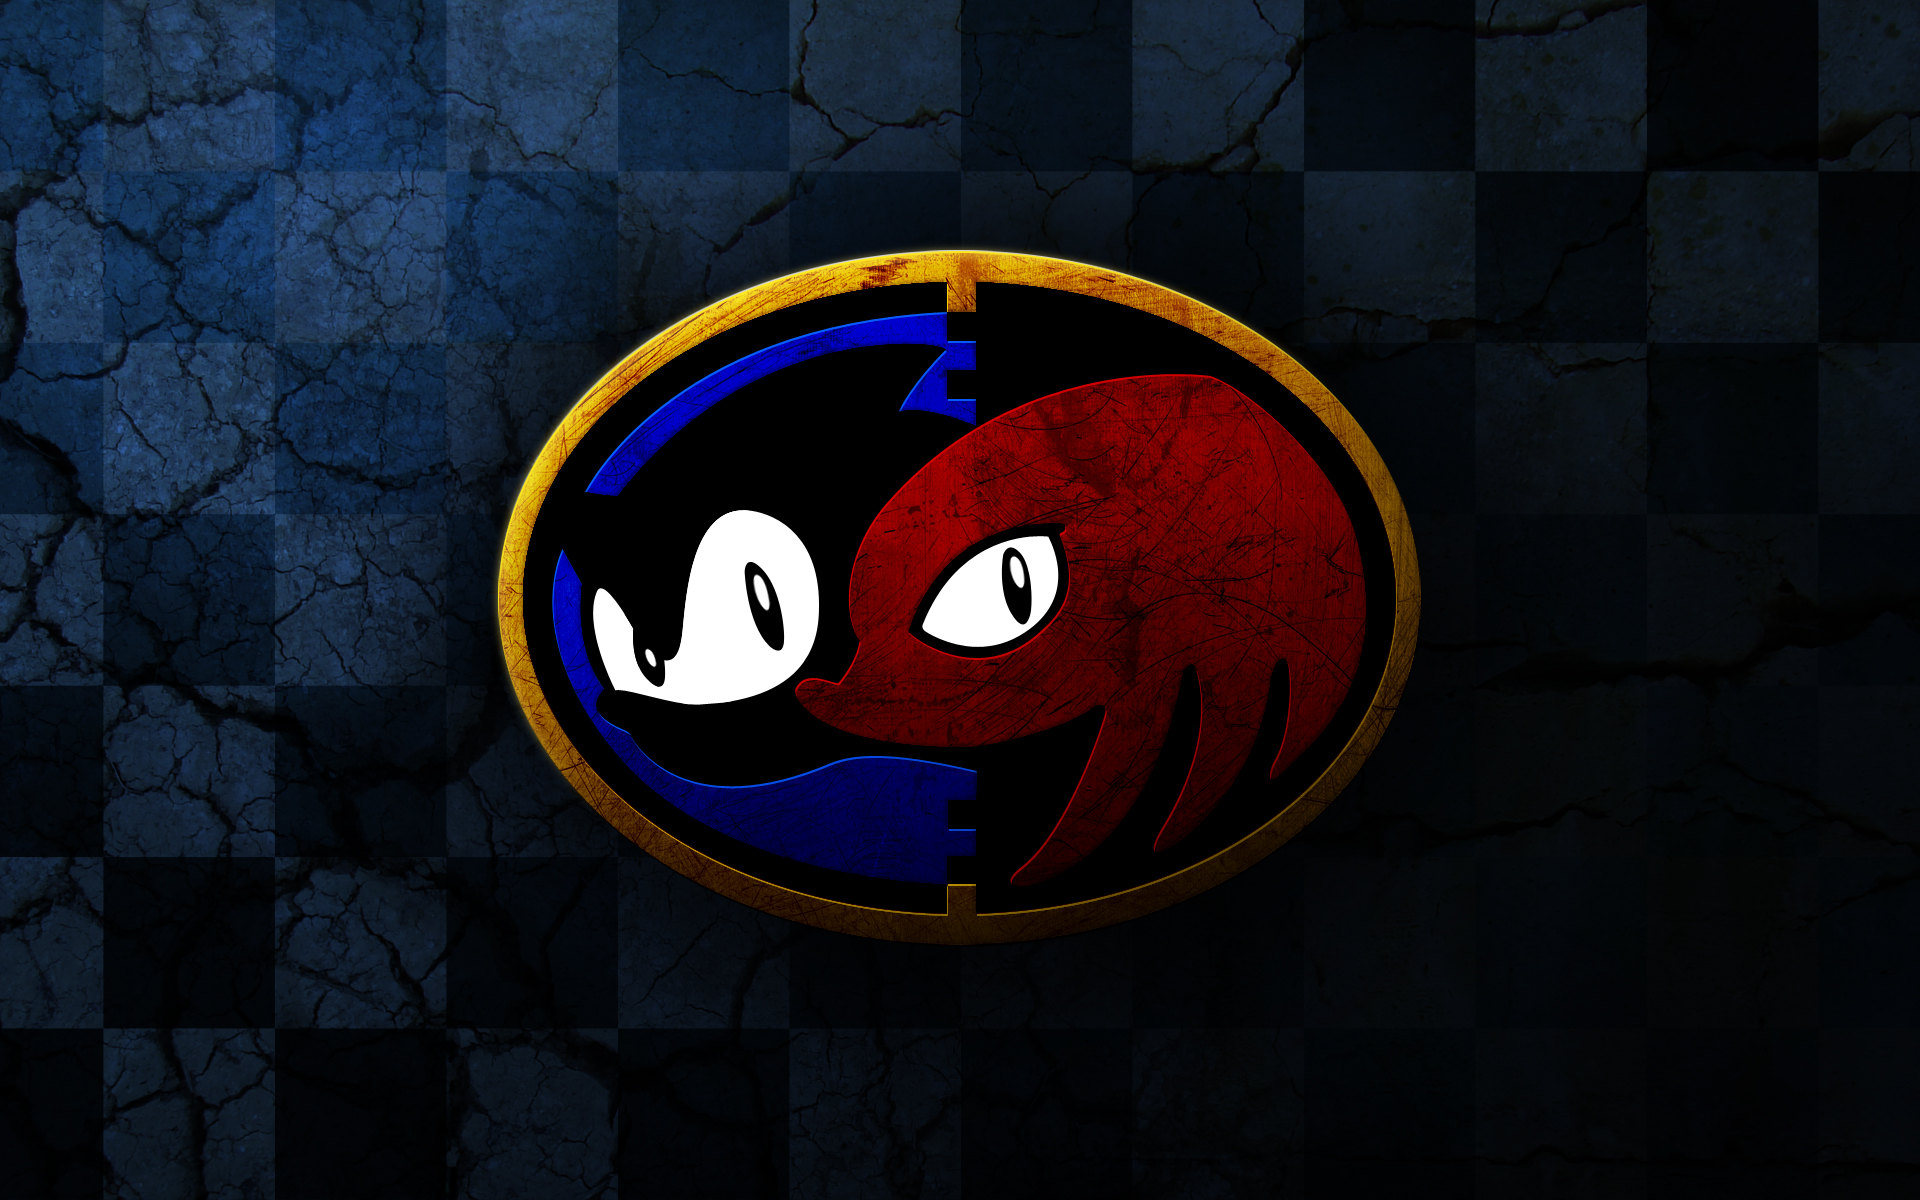 sonic & knuckles, sonic the hedgehog, video game, knuckles the echidna, sonic